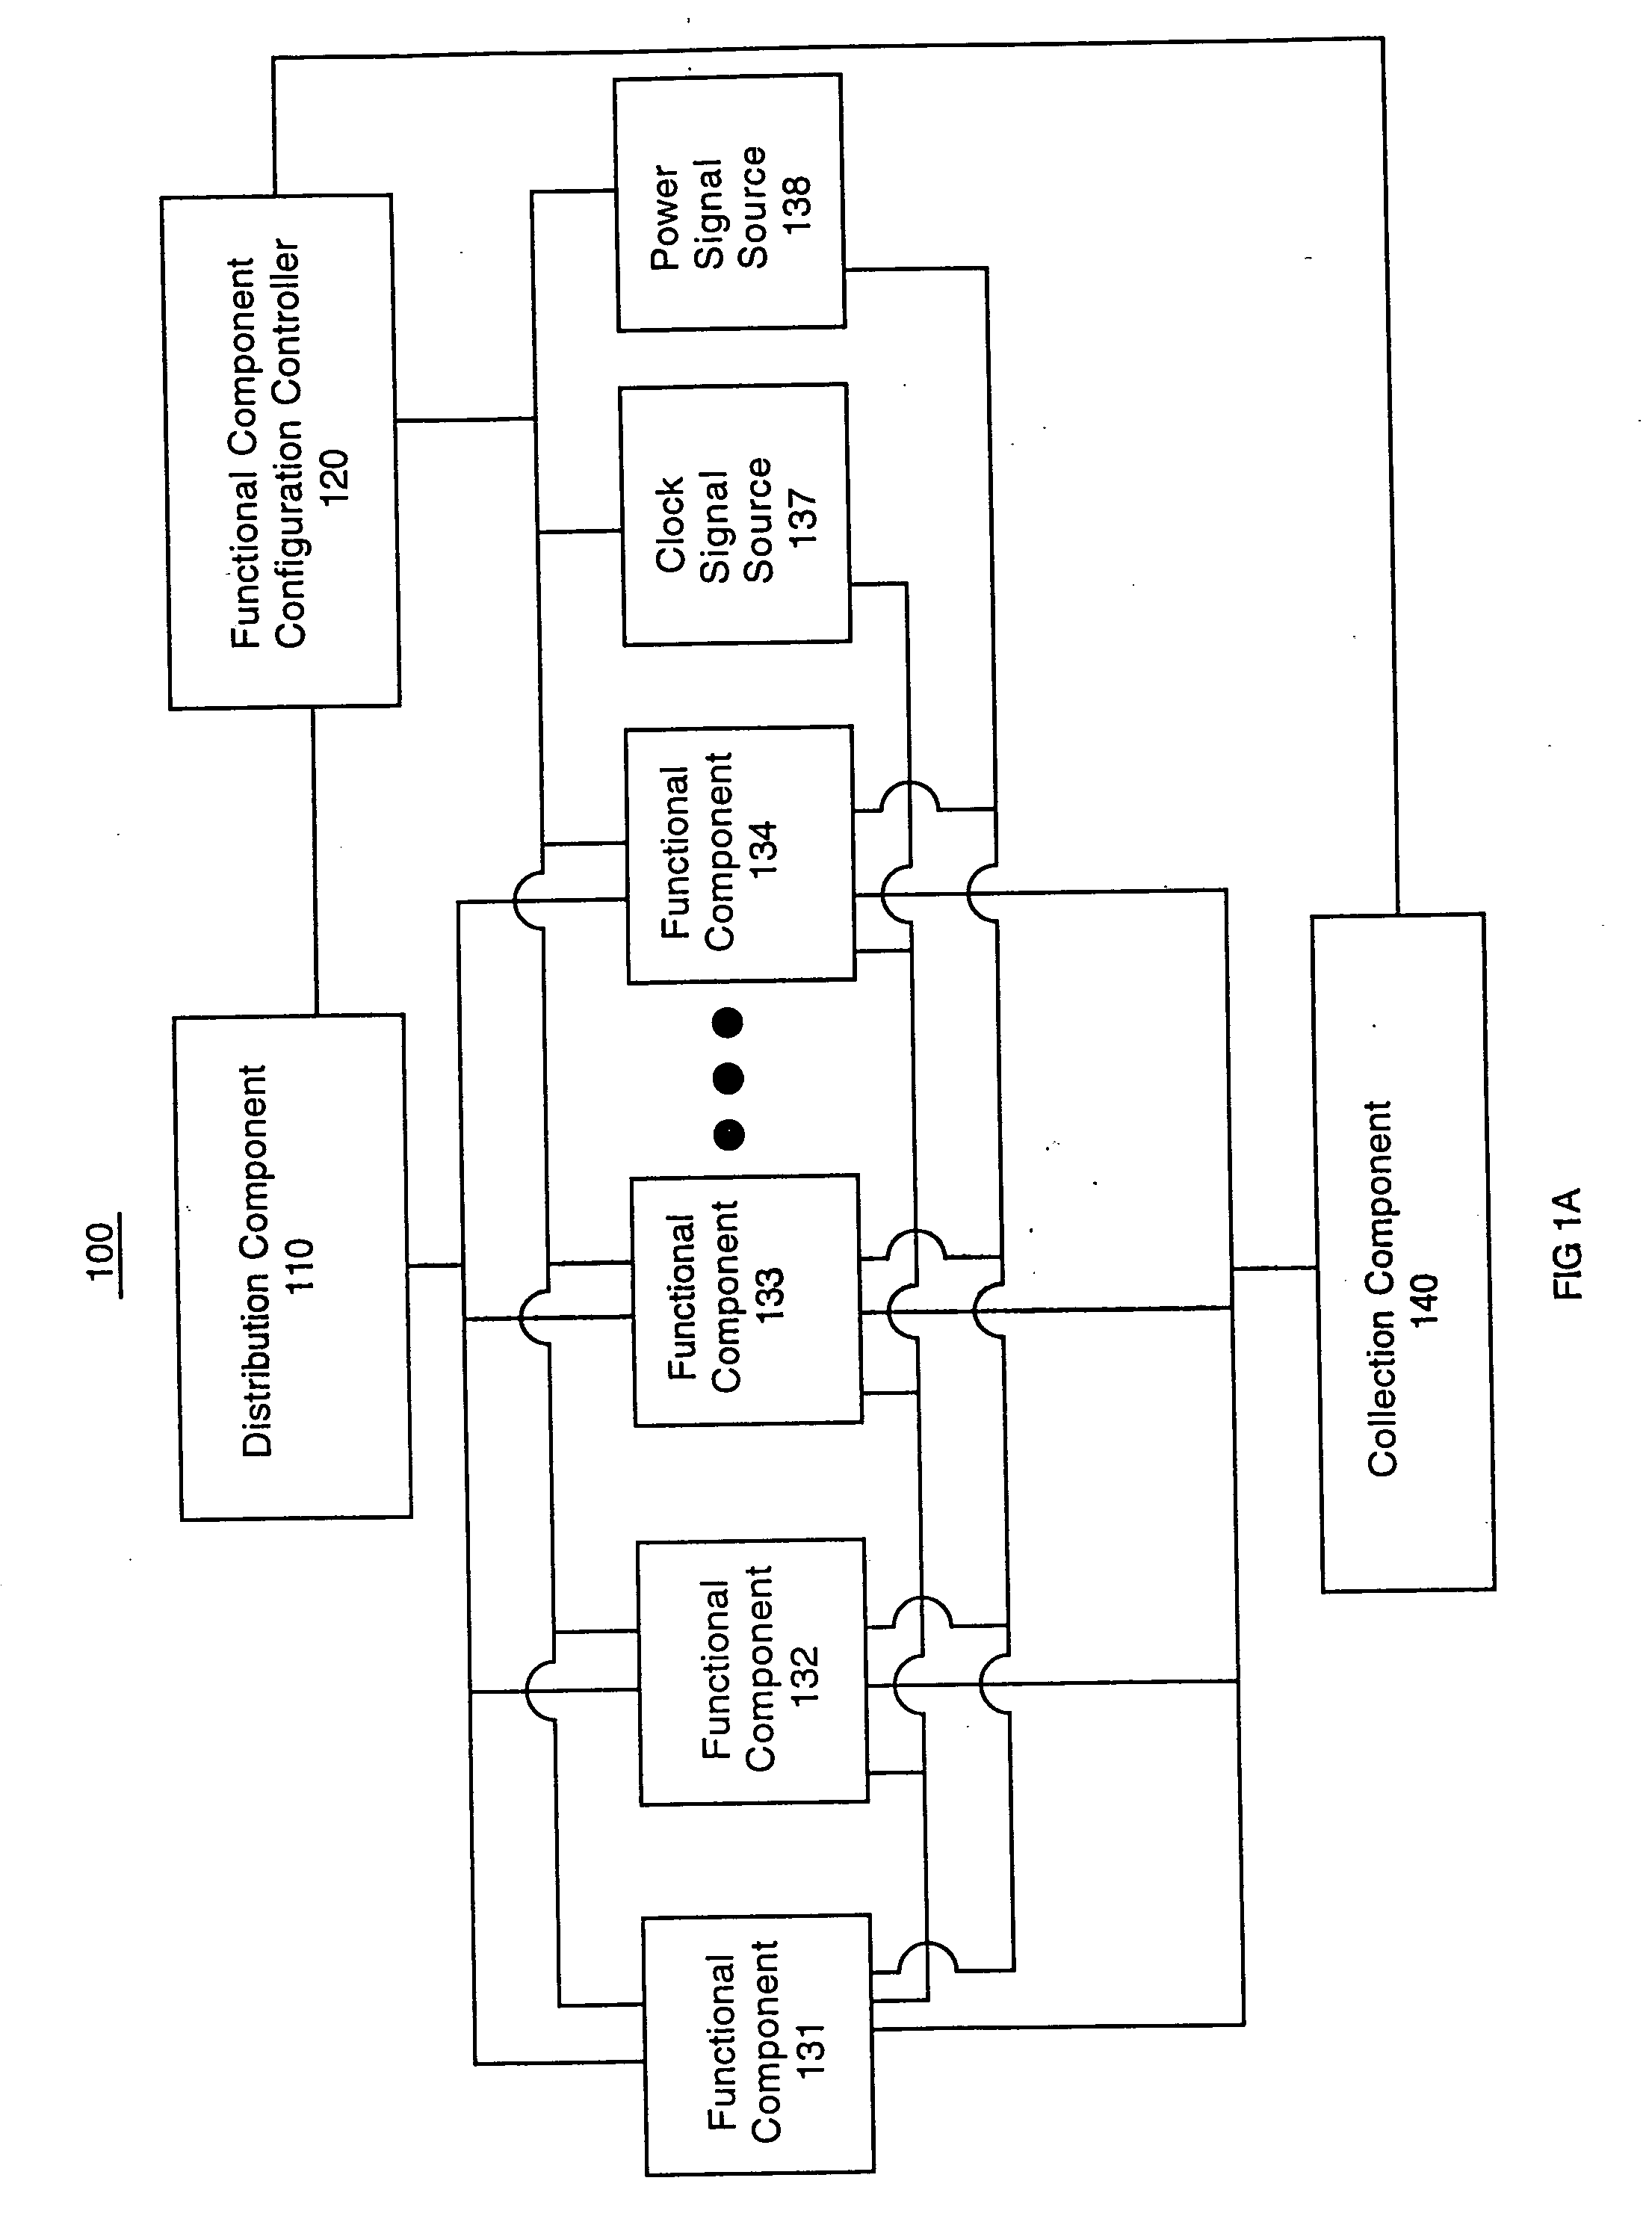 Integrated circuit configuration system and method